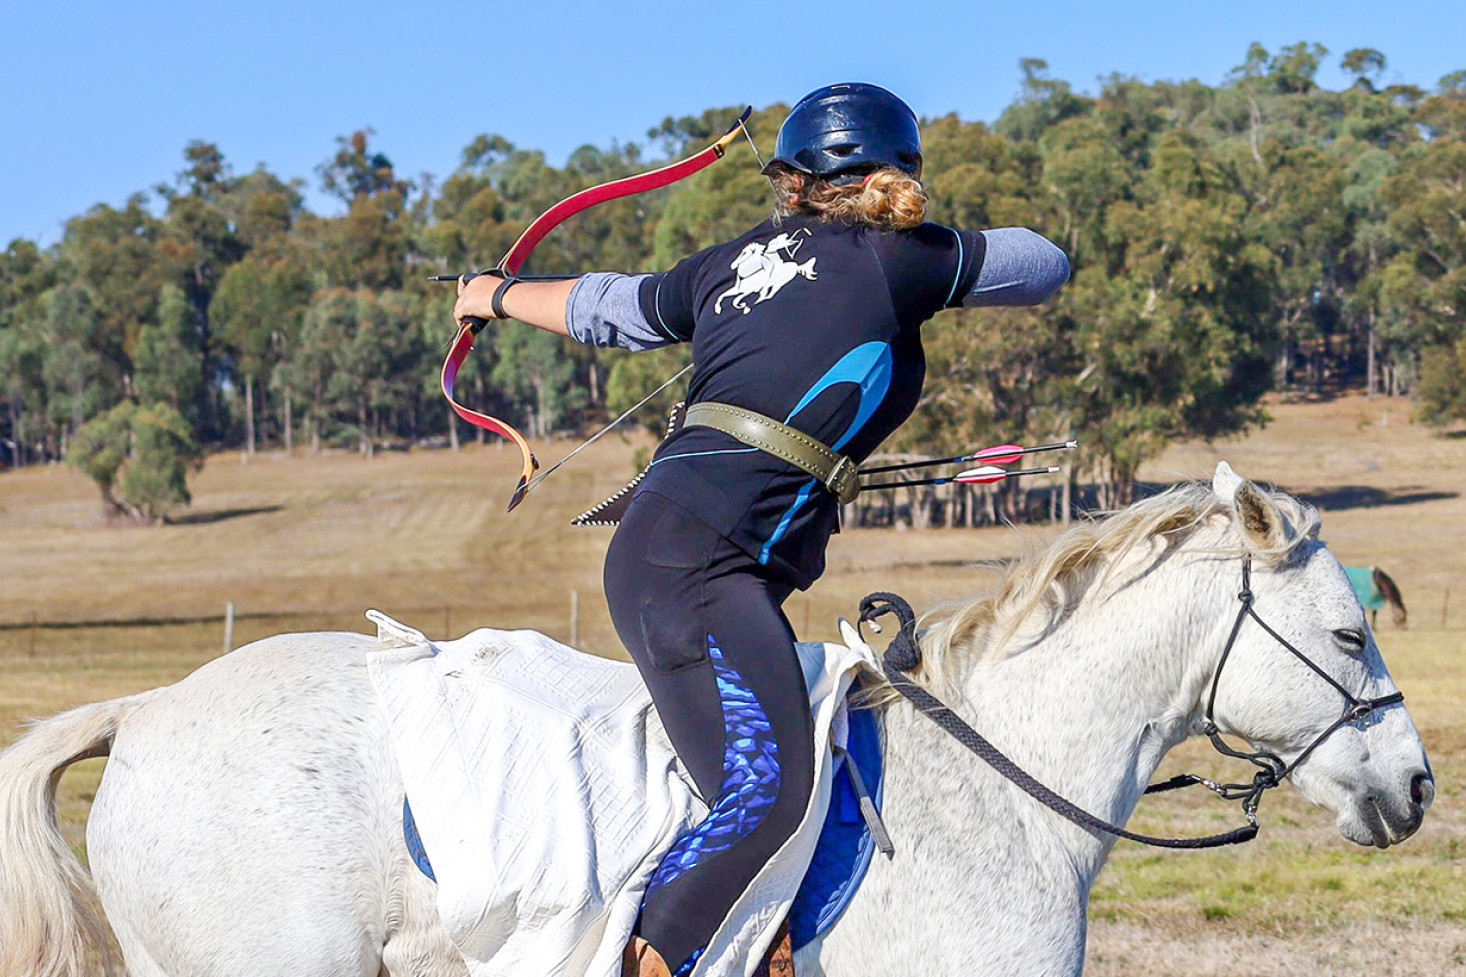 Kimberley Robertson and Chiko competing in horse archery, which combines two separate skills into the one sport. Photo, Abbeys Run Equestrian